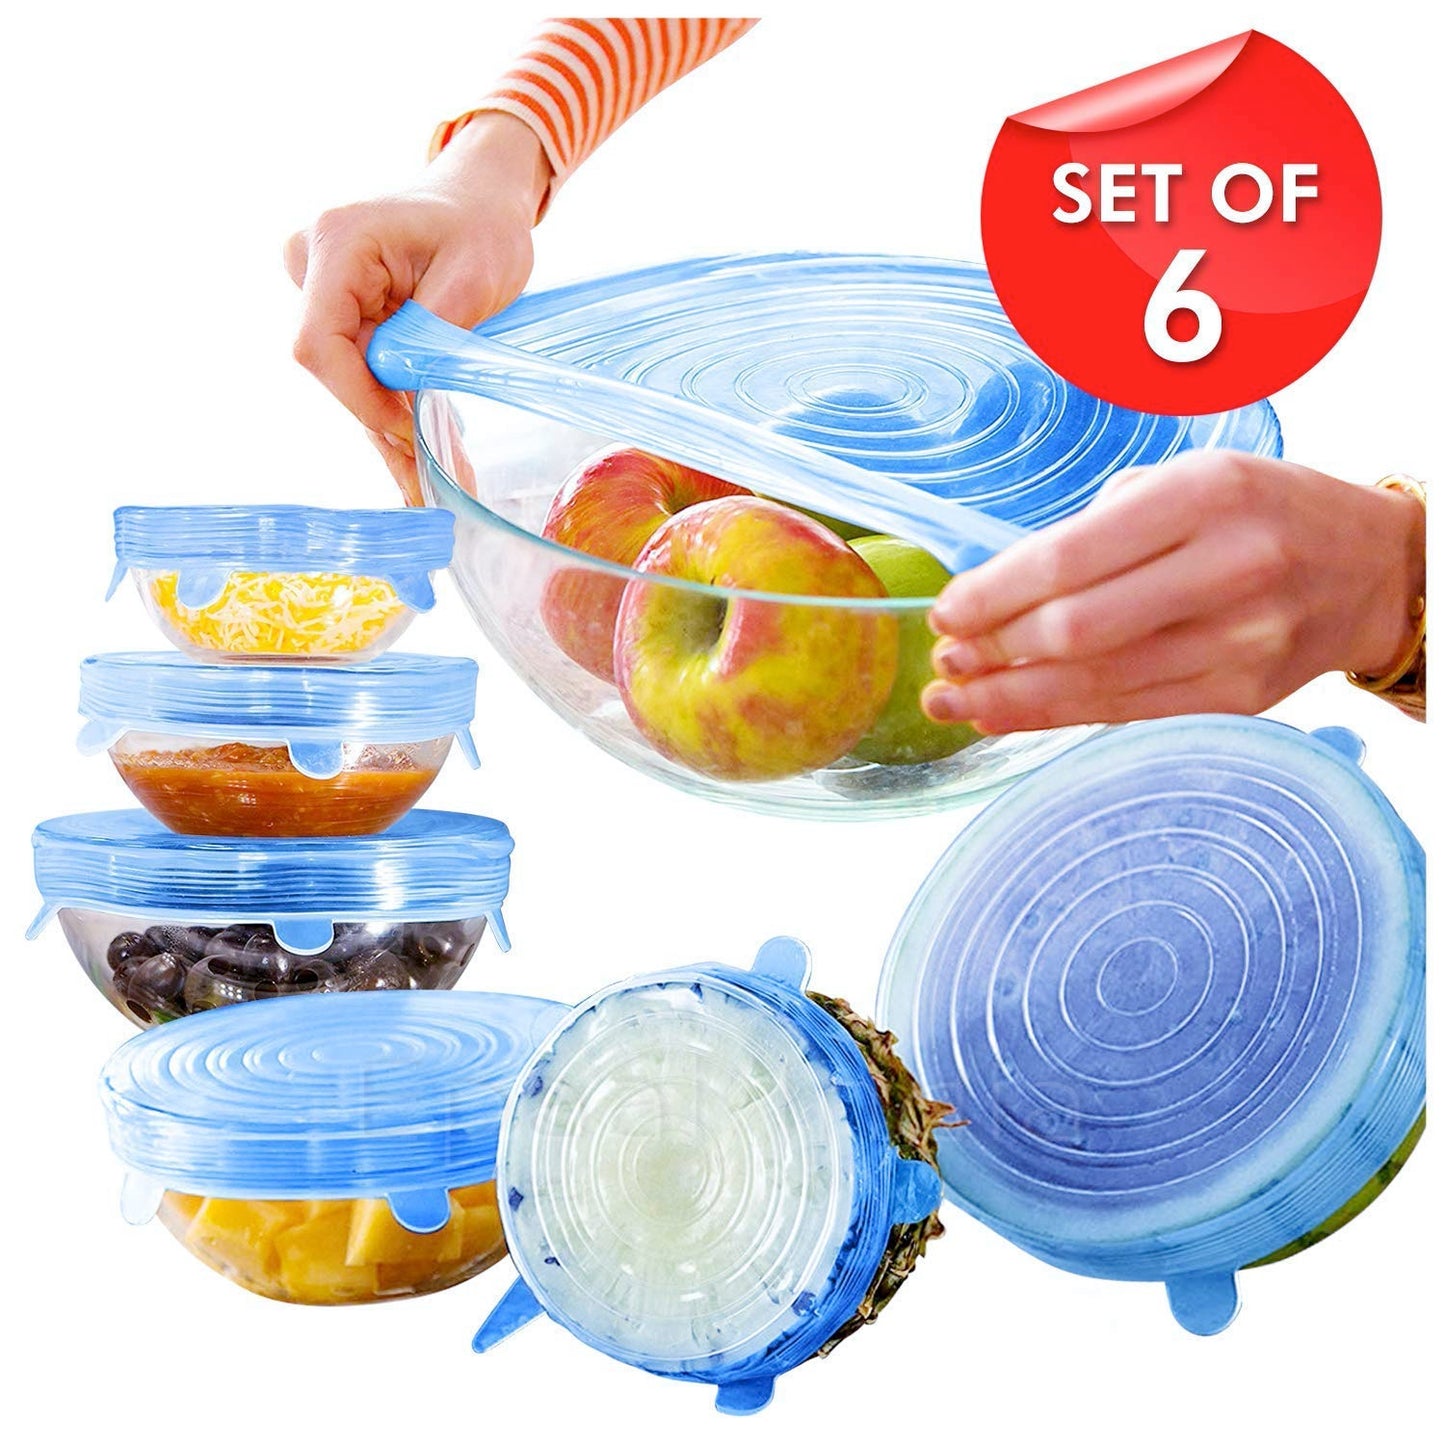 [Clearance] Set of 6 Reusable Safety Silicone Stretch Dishwasher Lids Flexible Covers